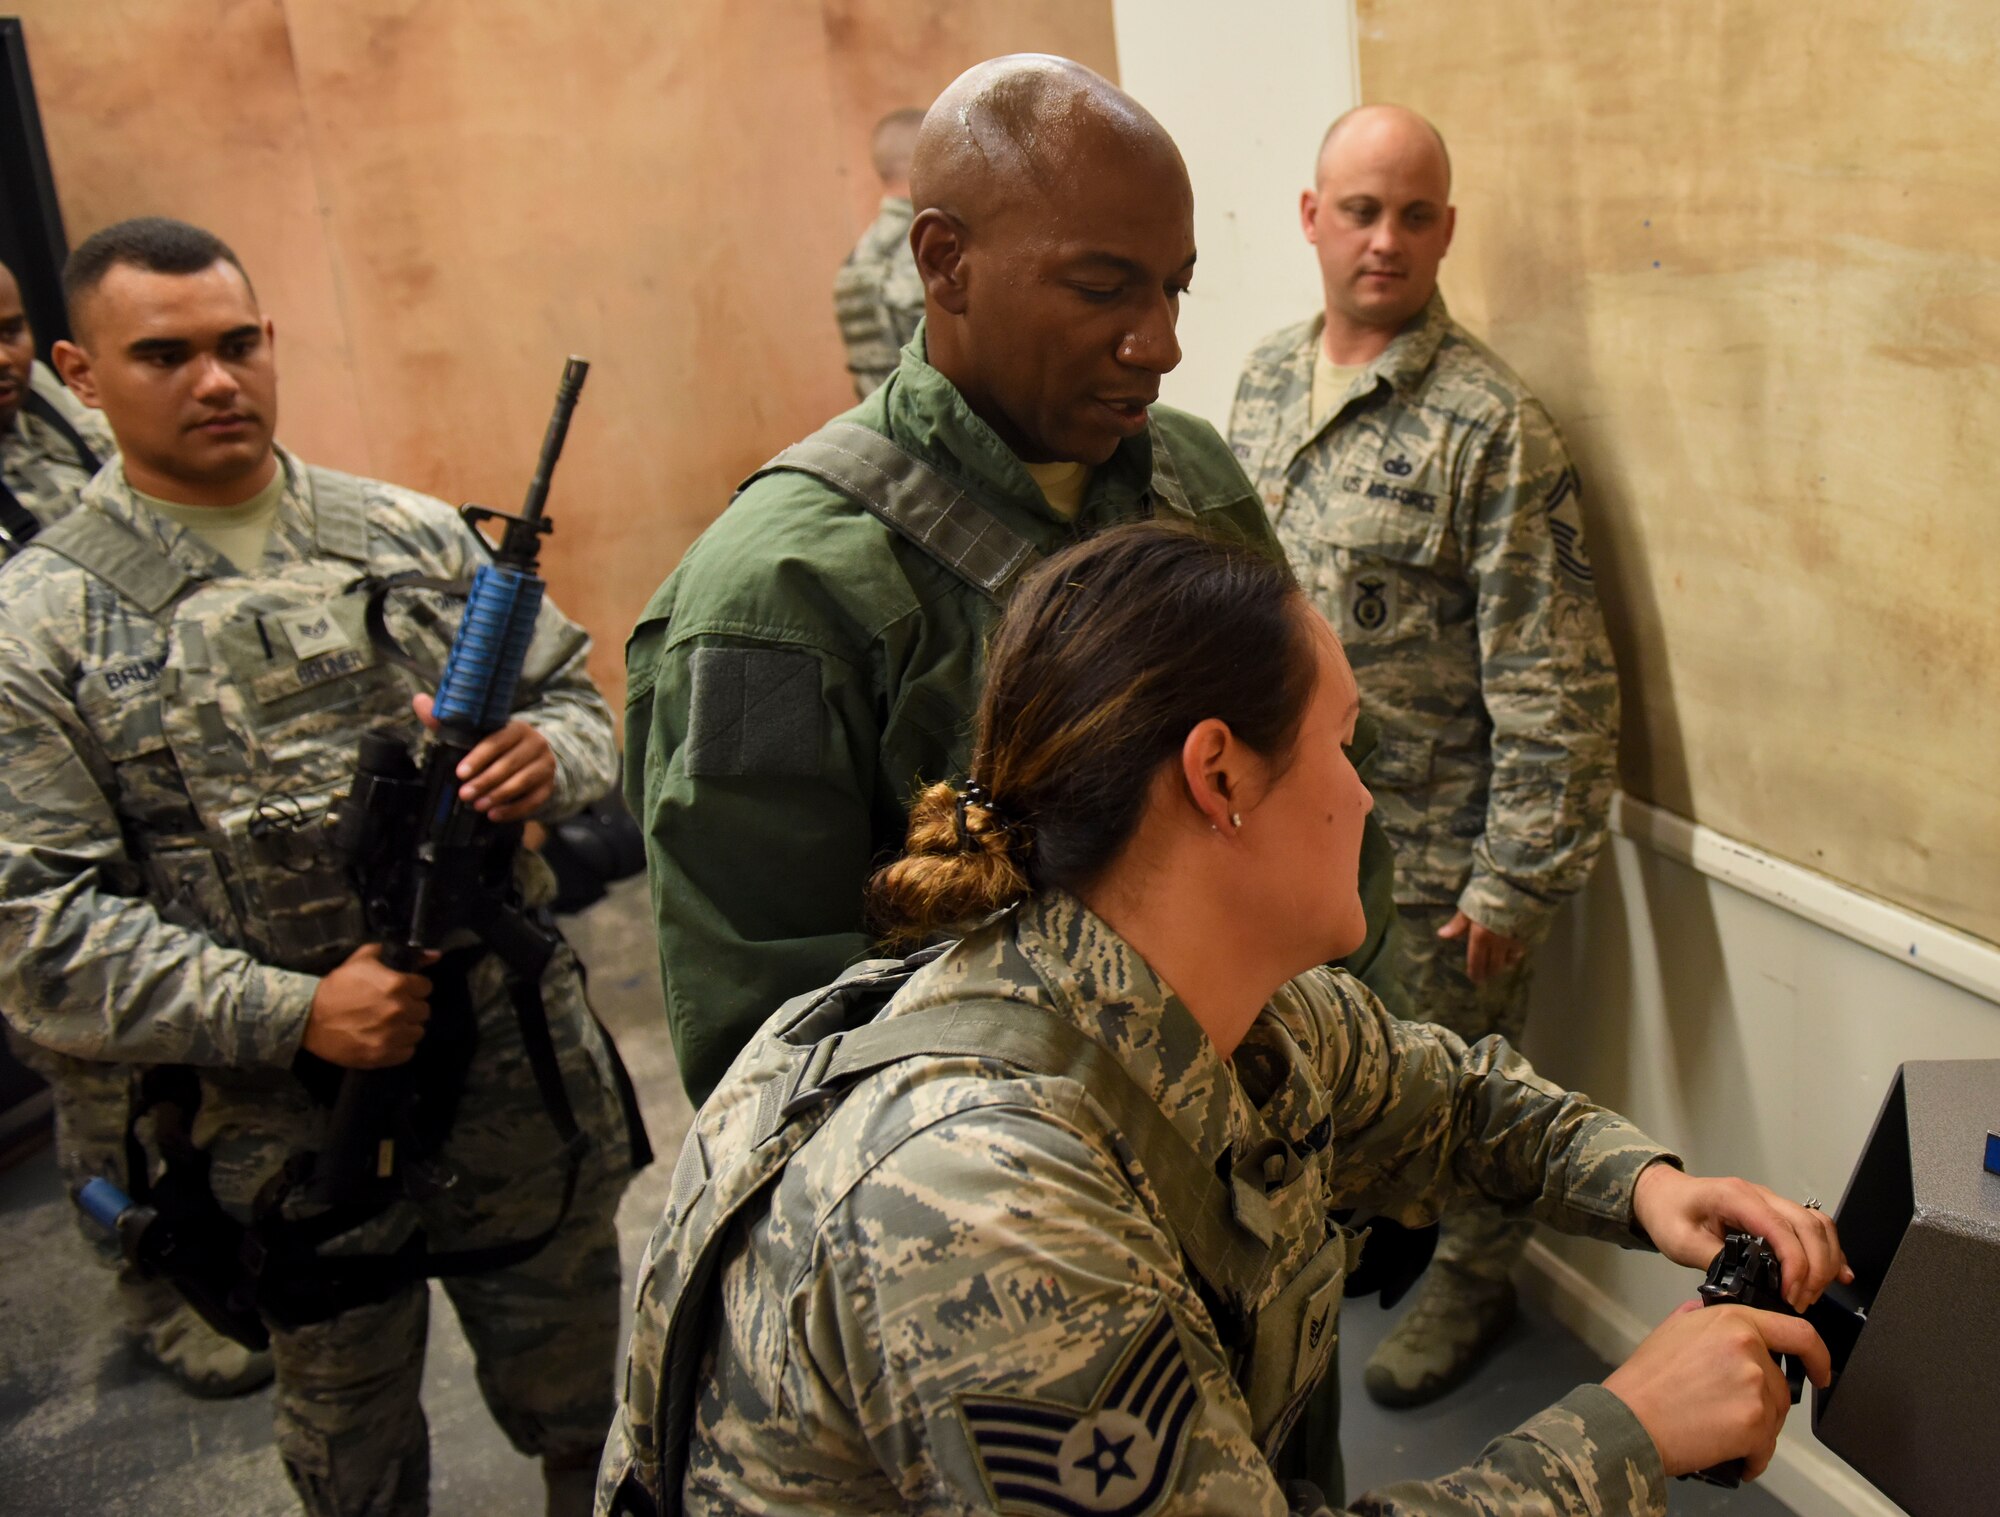 U.S. Air Force Staff Sgt. Katherine Tedrow, 100th Security Forces Squadron trainer, demonstrates how to clear a weapon during Chief Master Sgt. of the Air Force Kaleth O. Wright’s immersion tour of RAF Mildenhall, England, Aug. 2, 2018. During the visit, Wright took part in a 100th Security Forces Squadron shoot-house demonstration, participated in a Forward Area Refueling Point exercise, and spoke with RAF Mildenhall Airmen at an all-call. (U.S. Air Force photo by Senior Airman Luke Milano)